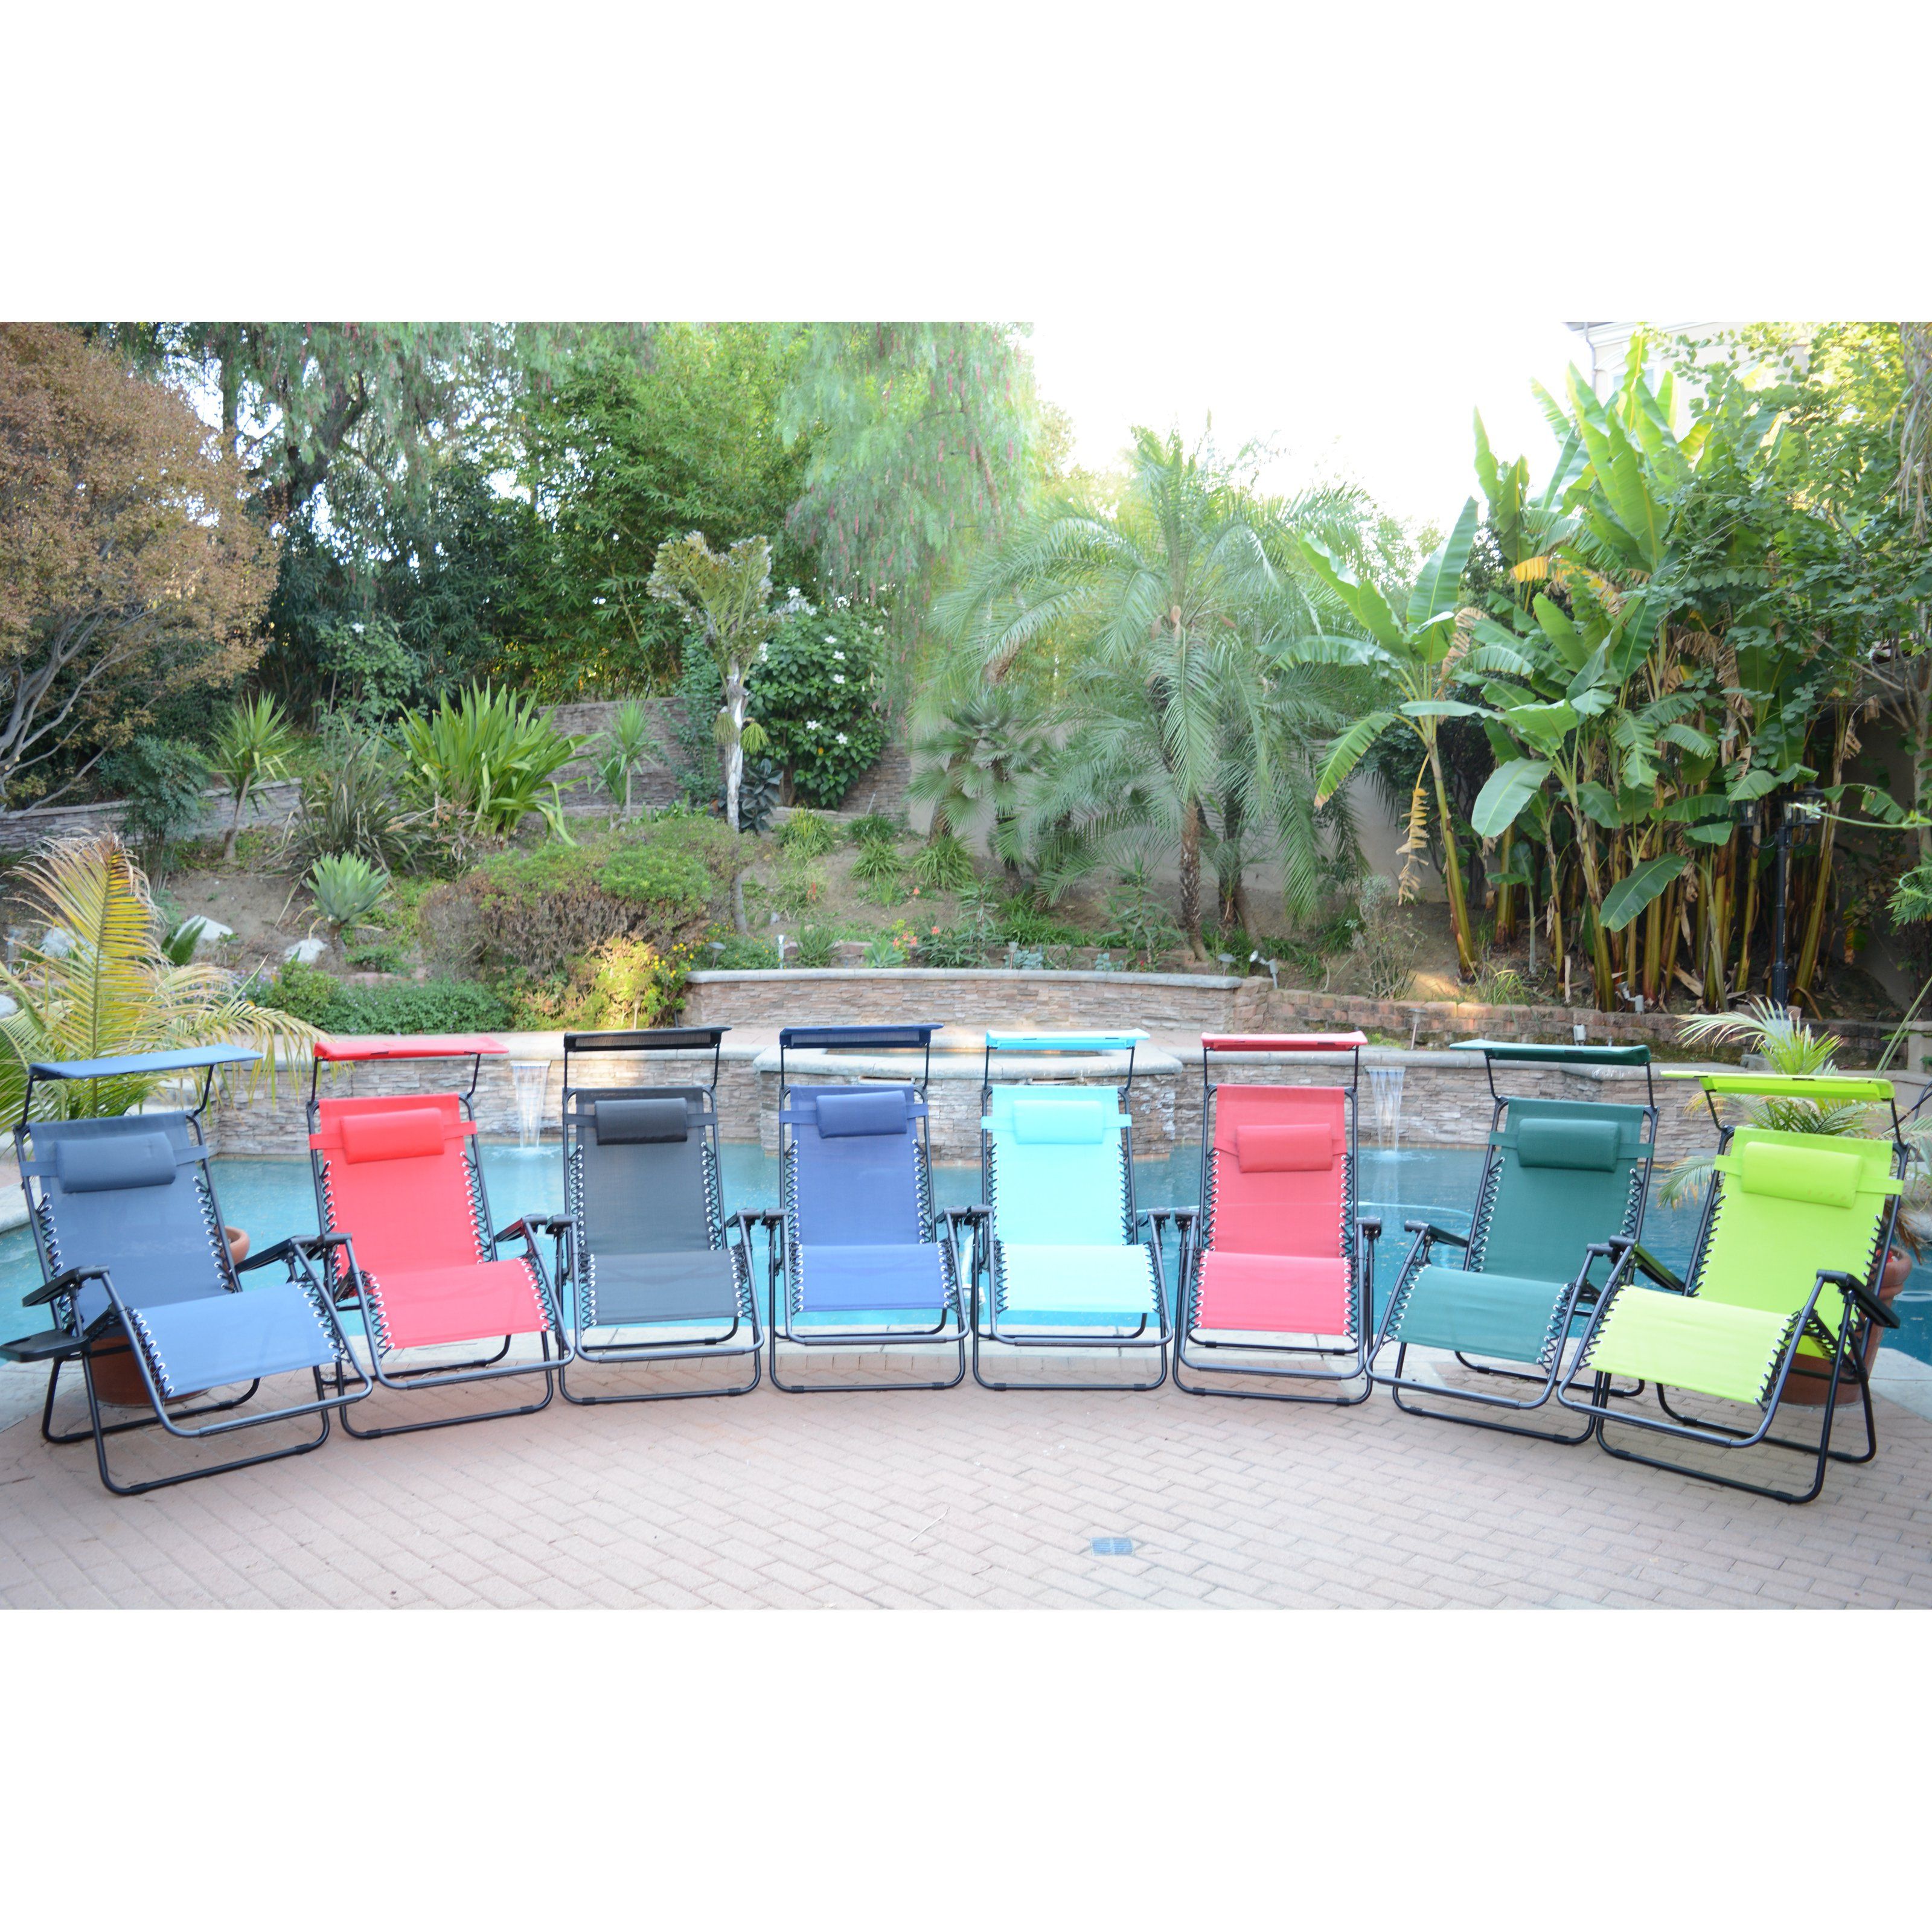 Most Recent Garden Oversized Chairs With Sunshade And Drink Tray Pertaining To Jeco Oversized Zero Gravity Chair With Sunshade And Drink Tray (View 4 of 25)